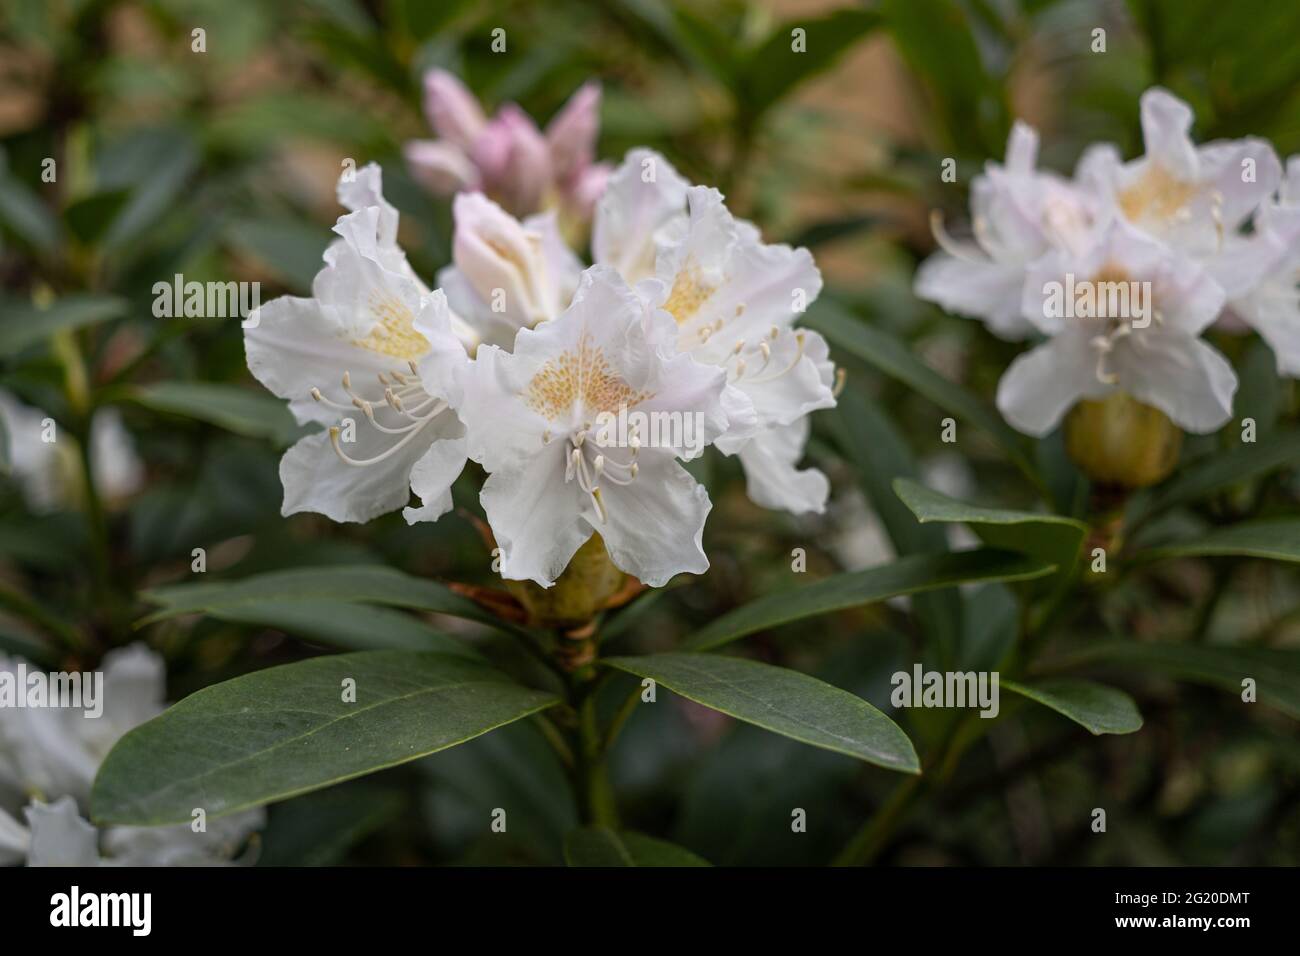 Early blooming rhododendron, early spring in the garden Stock Photo